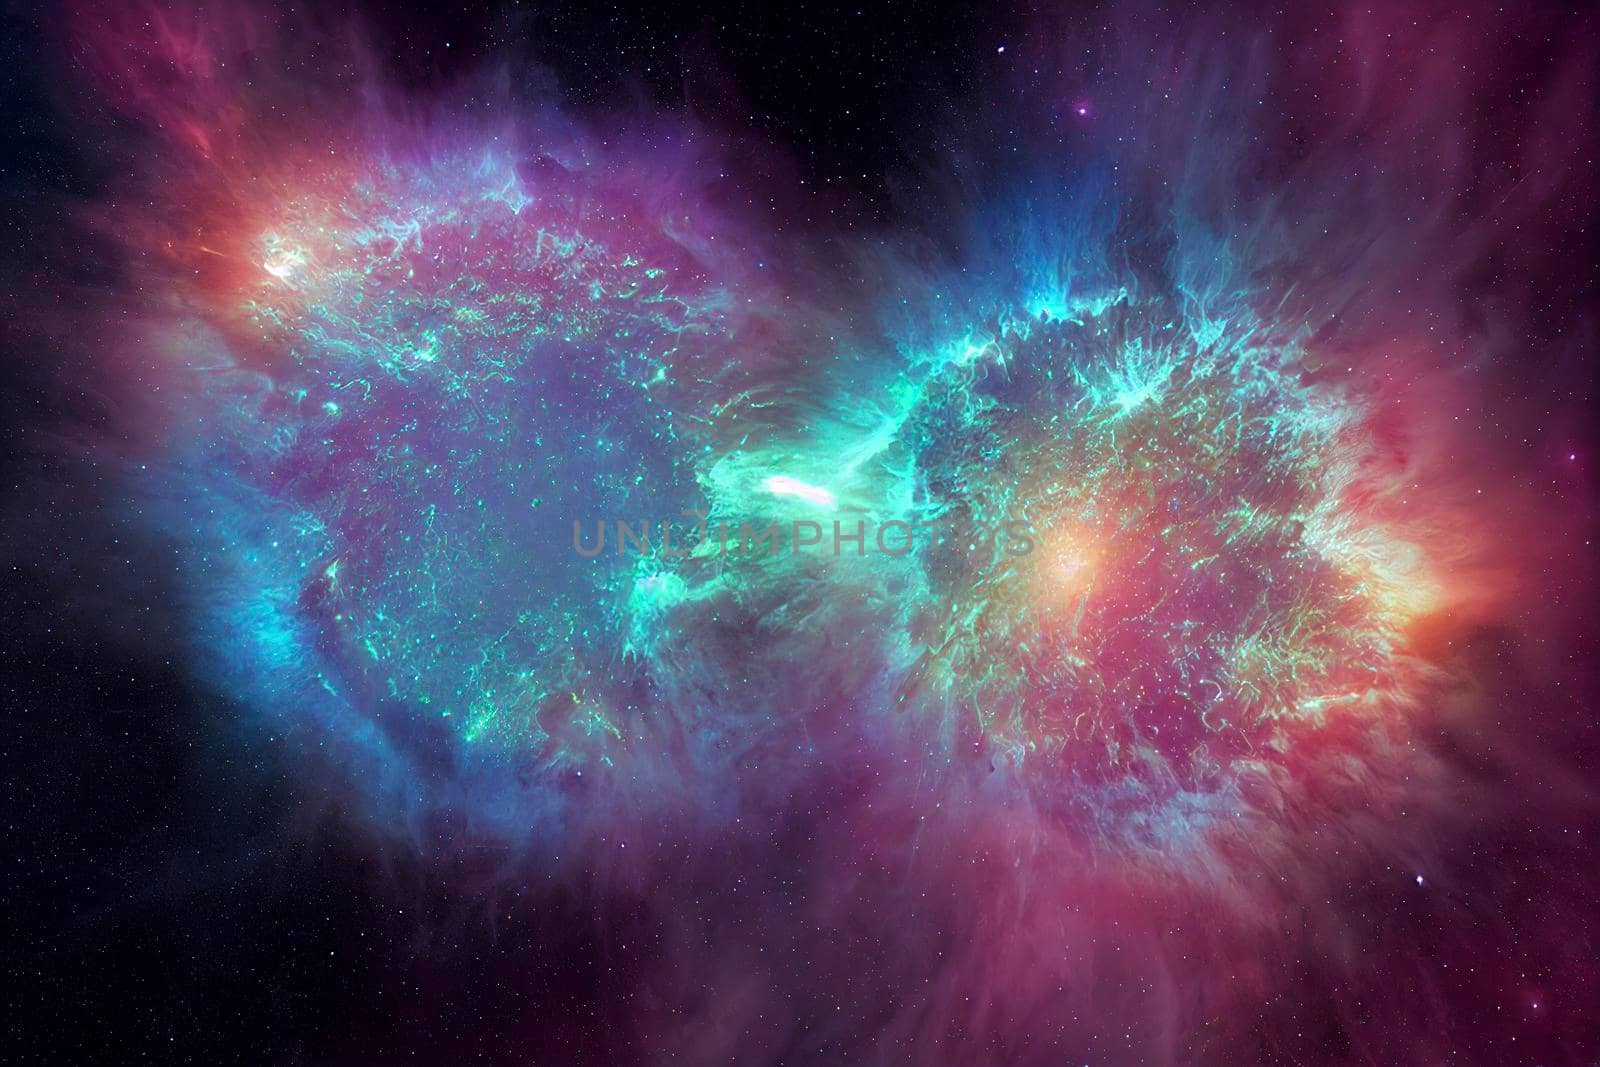 Computer Generated image of outer space. Star field on nebulae abstract background image. Night sky outer space wallpaper